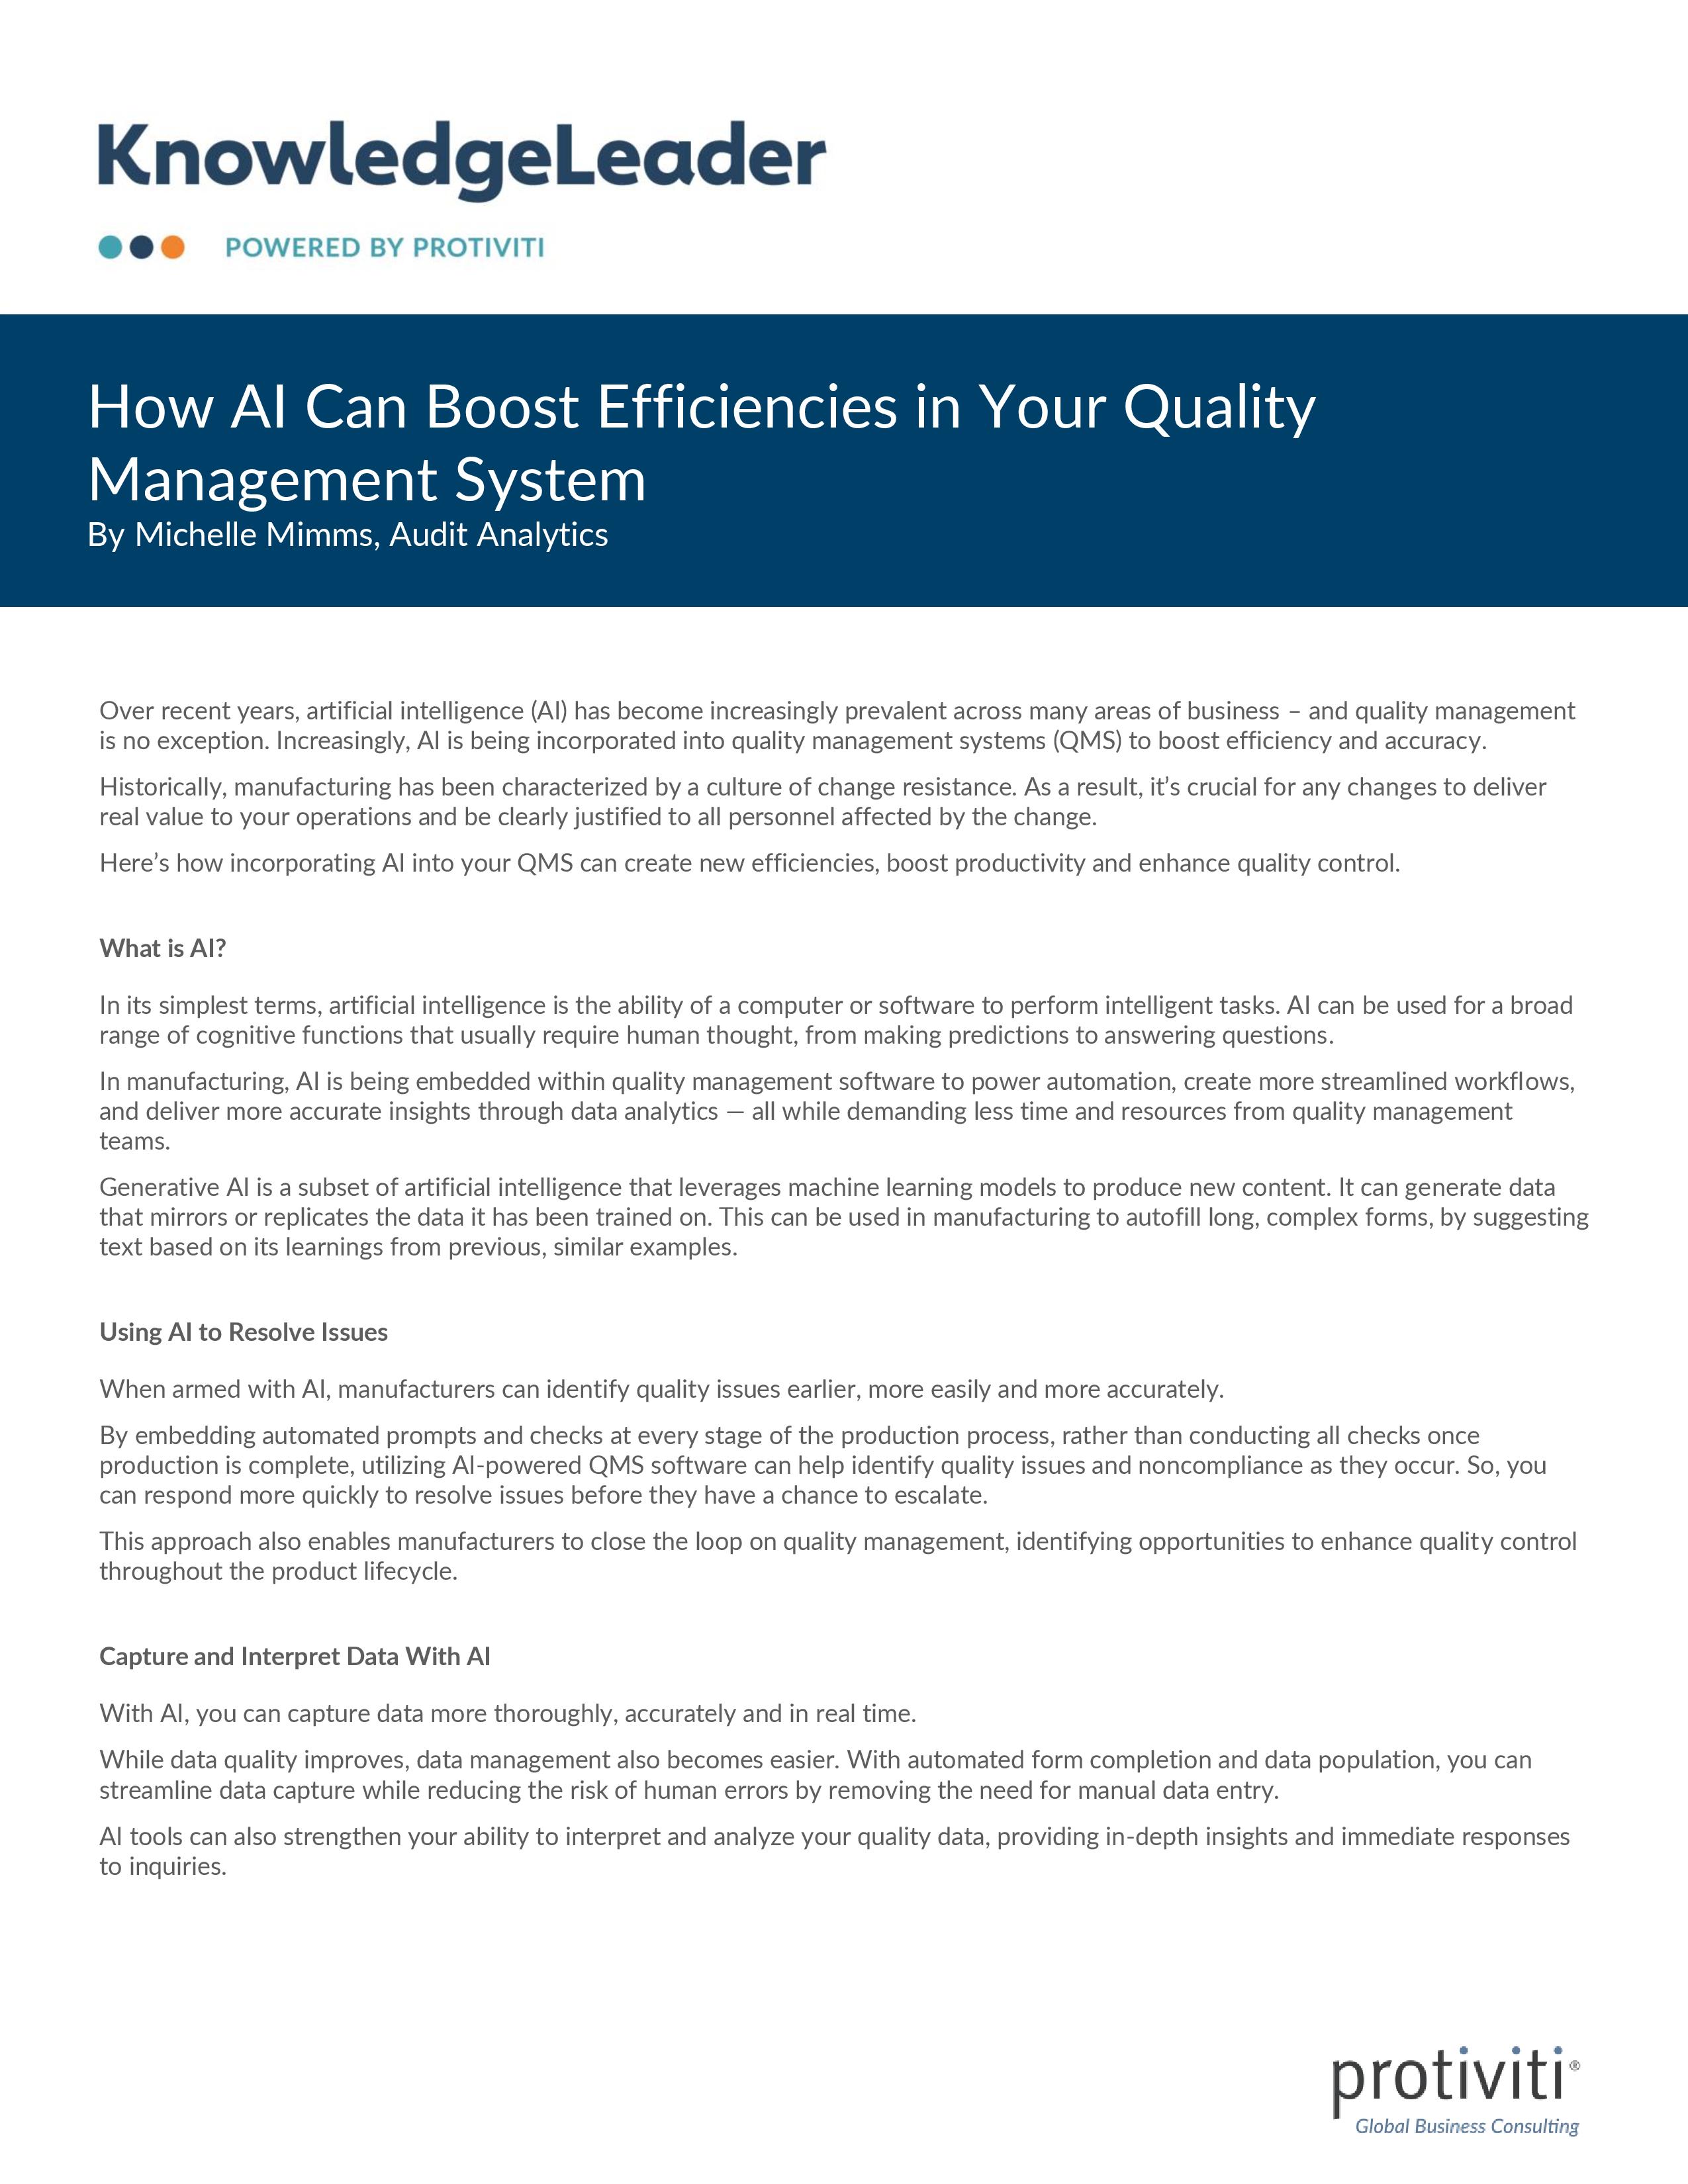 Screenshot of the first page of How AI Can Boost Efficiencies in Your Quality Management System